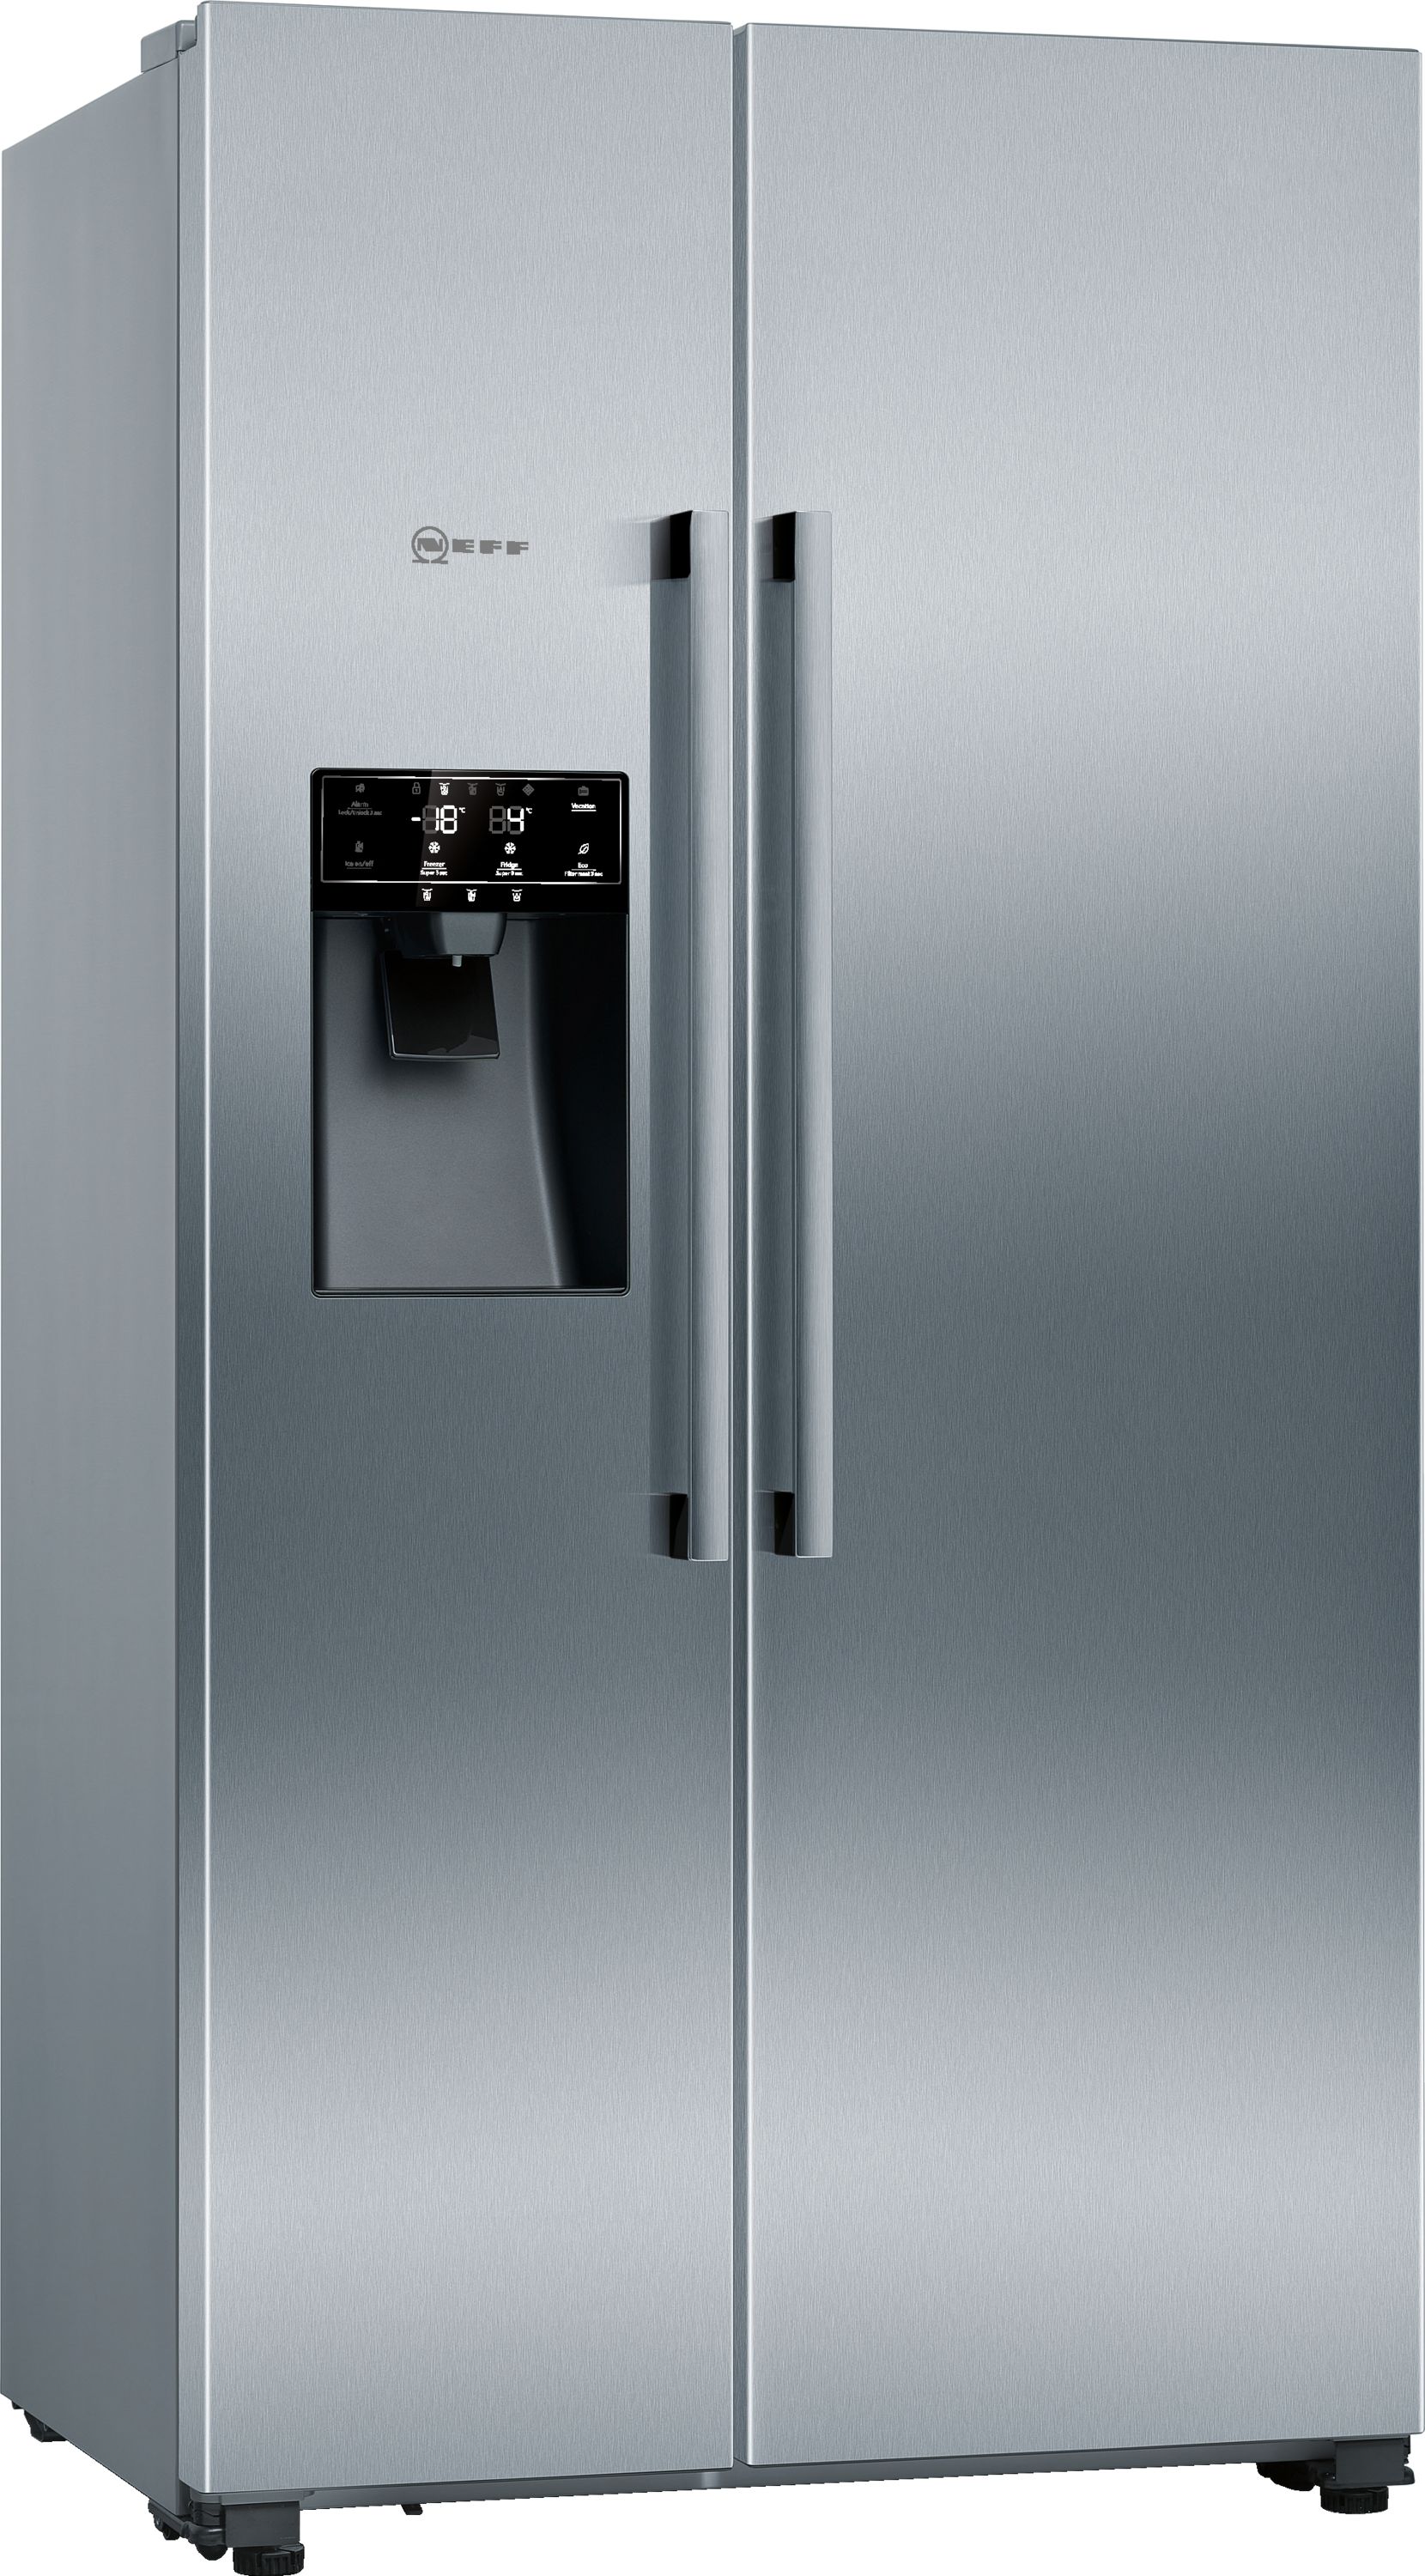 NEFF N70 KA3923IE0G Plumbed Frost Free American Fridge Freezer - Stainless Steel Effect - E Rated, Stainless Steel